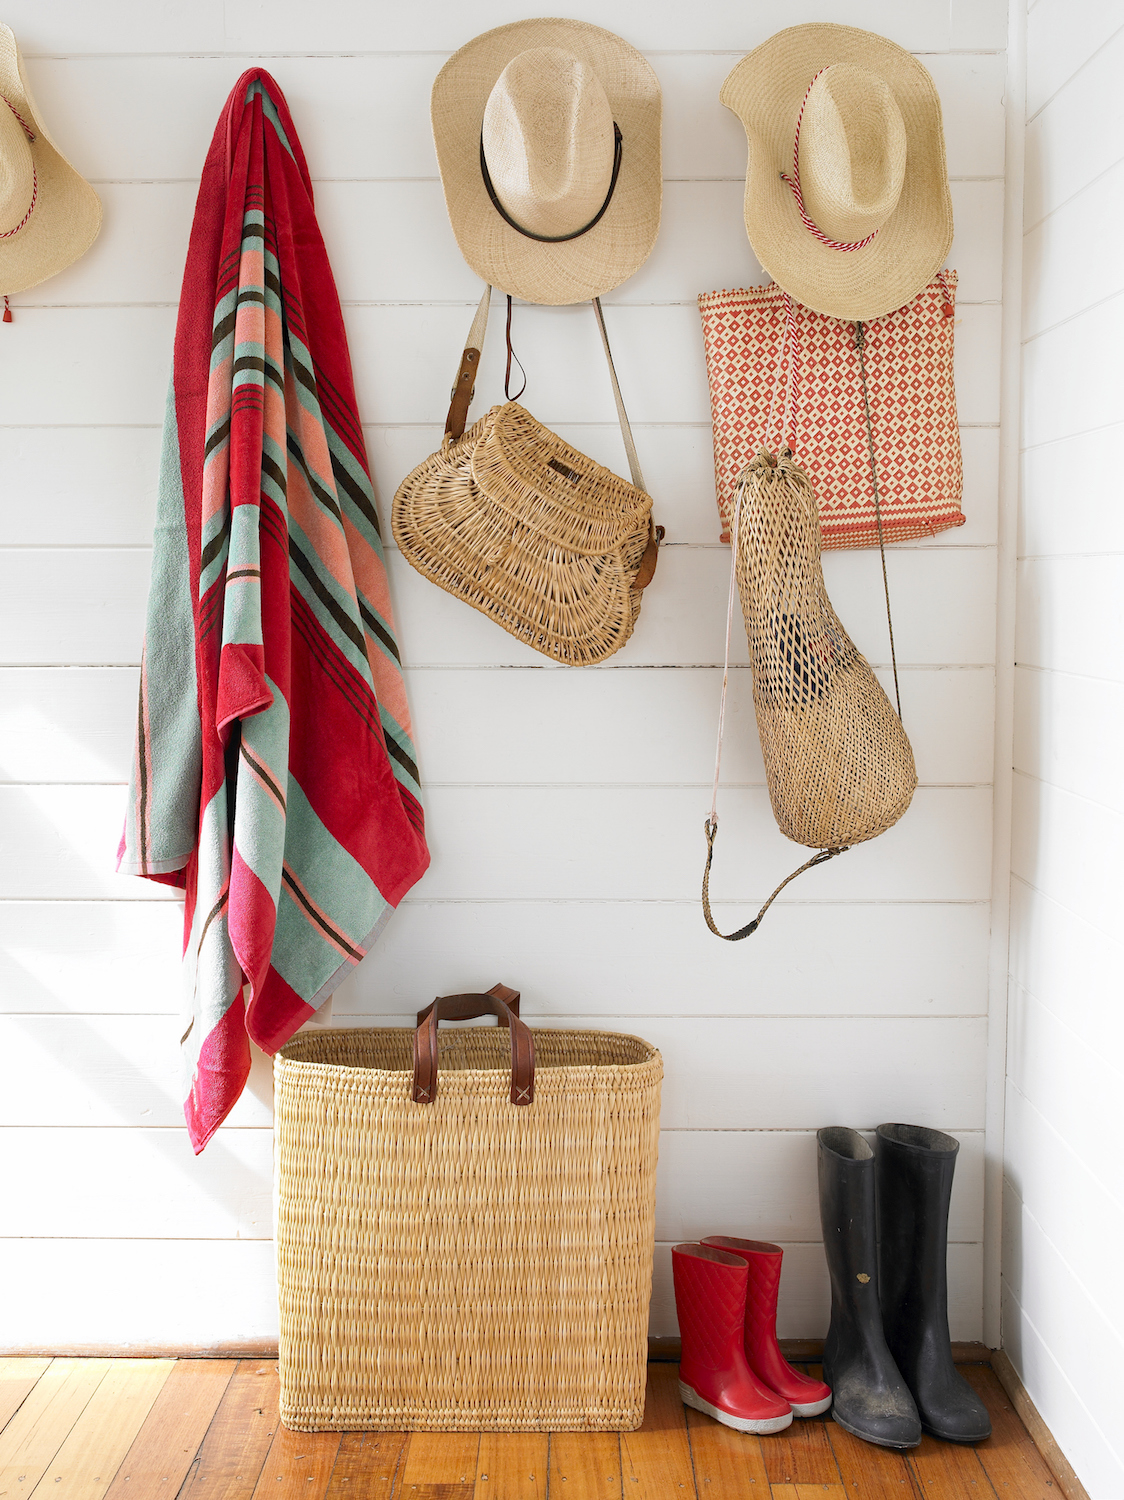 Hooks on a wall for hats, bags and towels